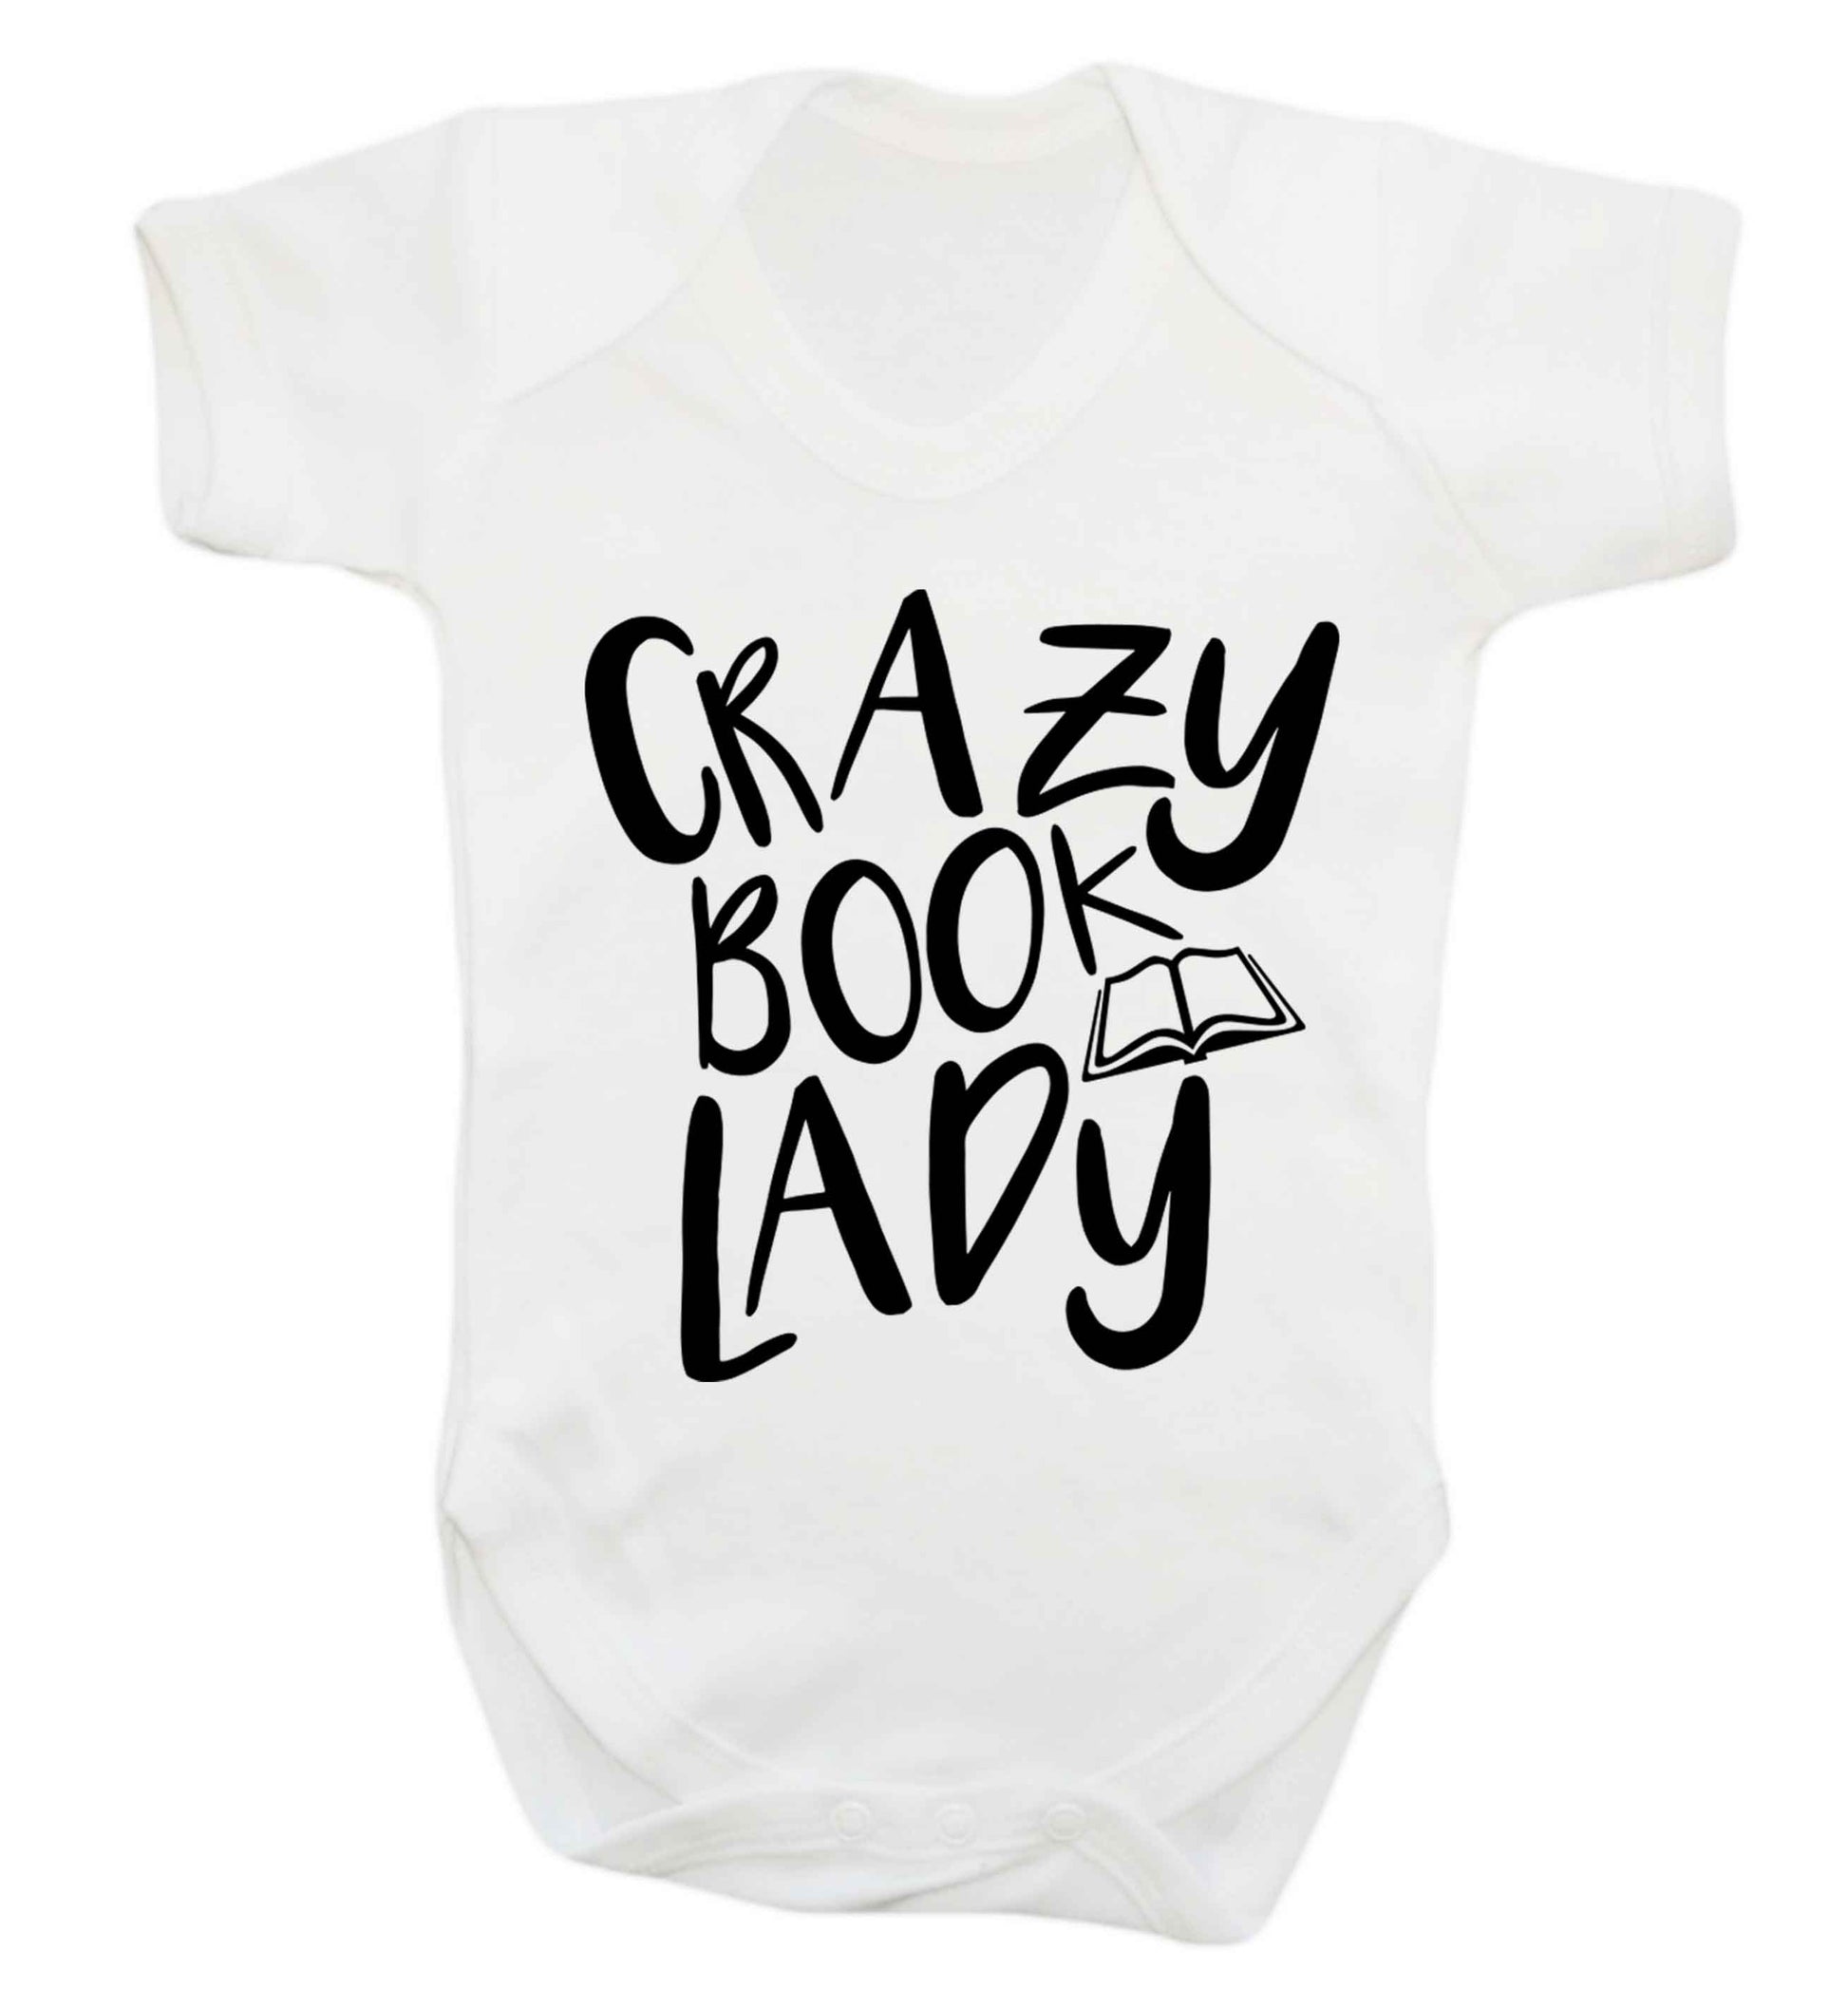 Crazy book lady Baby Vest white 18-24 months